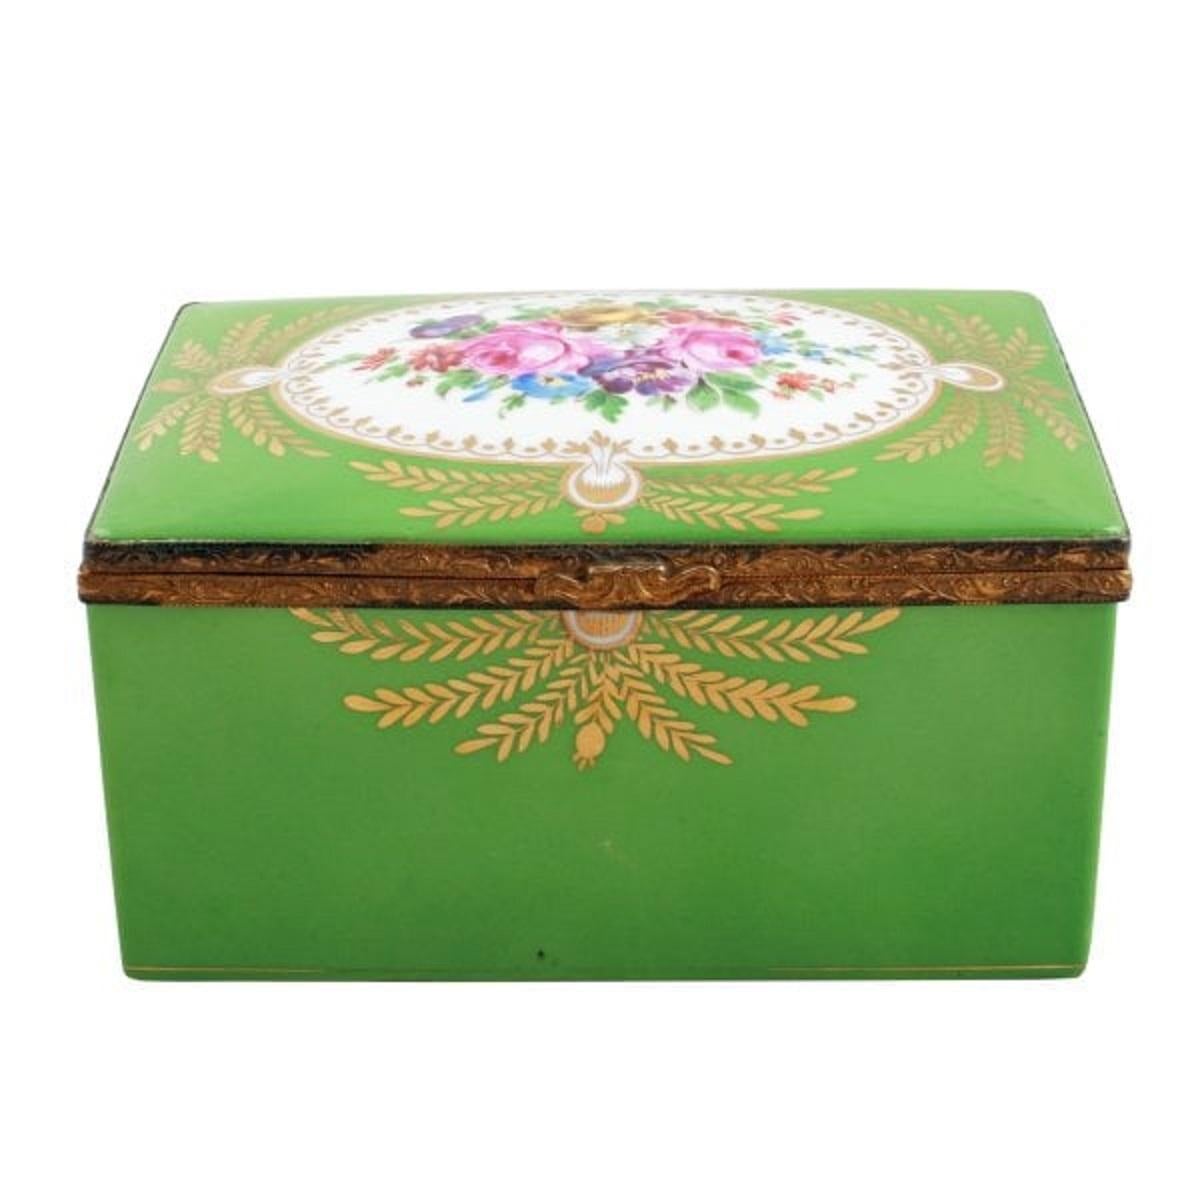 An beautiful 19th century French porcelain jewel or trinket box.

The box has a domed hinged lid that is decorated with hand painted flowers and gilt detail.

The lid and box edges are gilt brass and the underside of the lid has hand painted